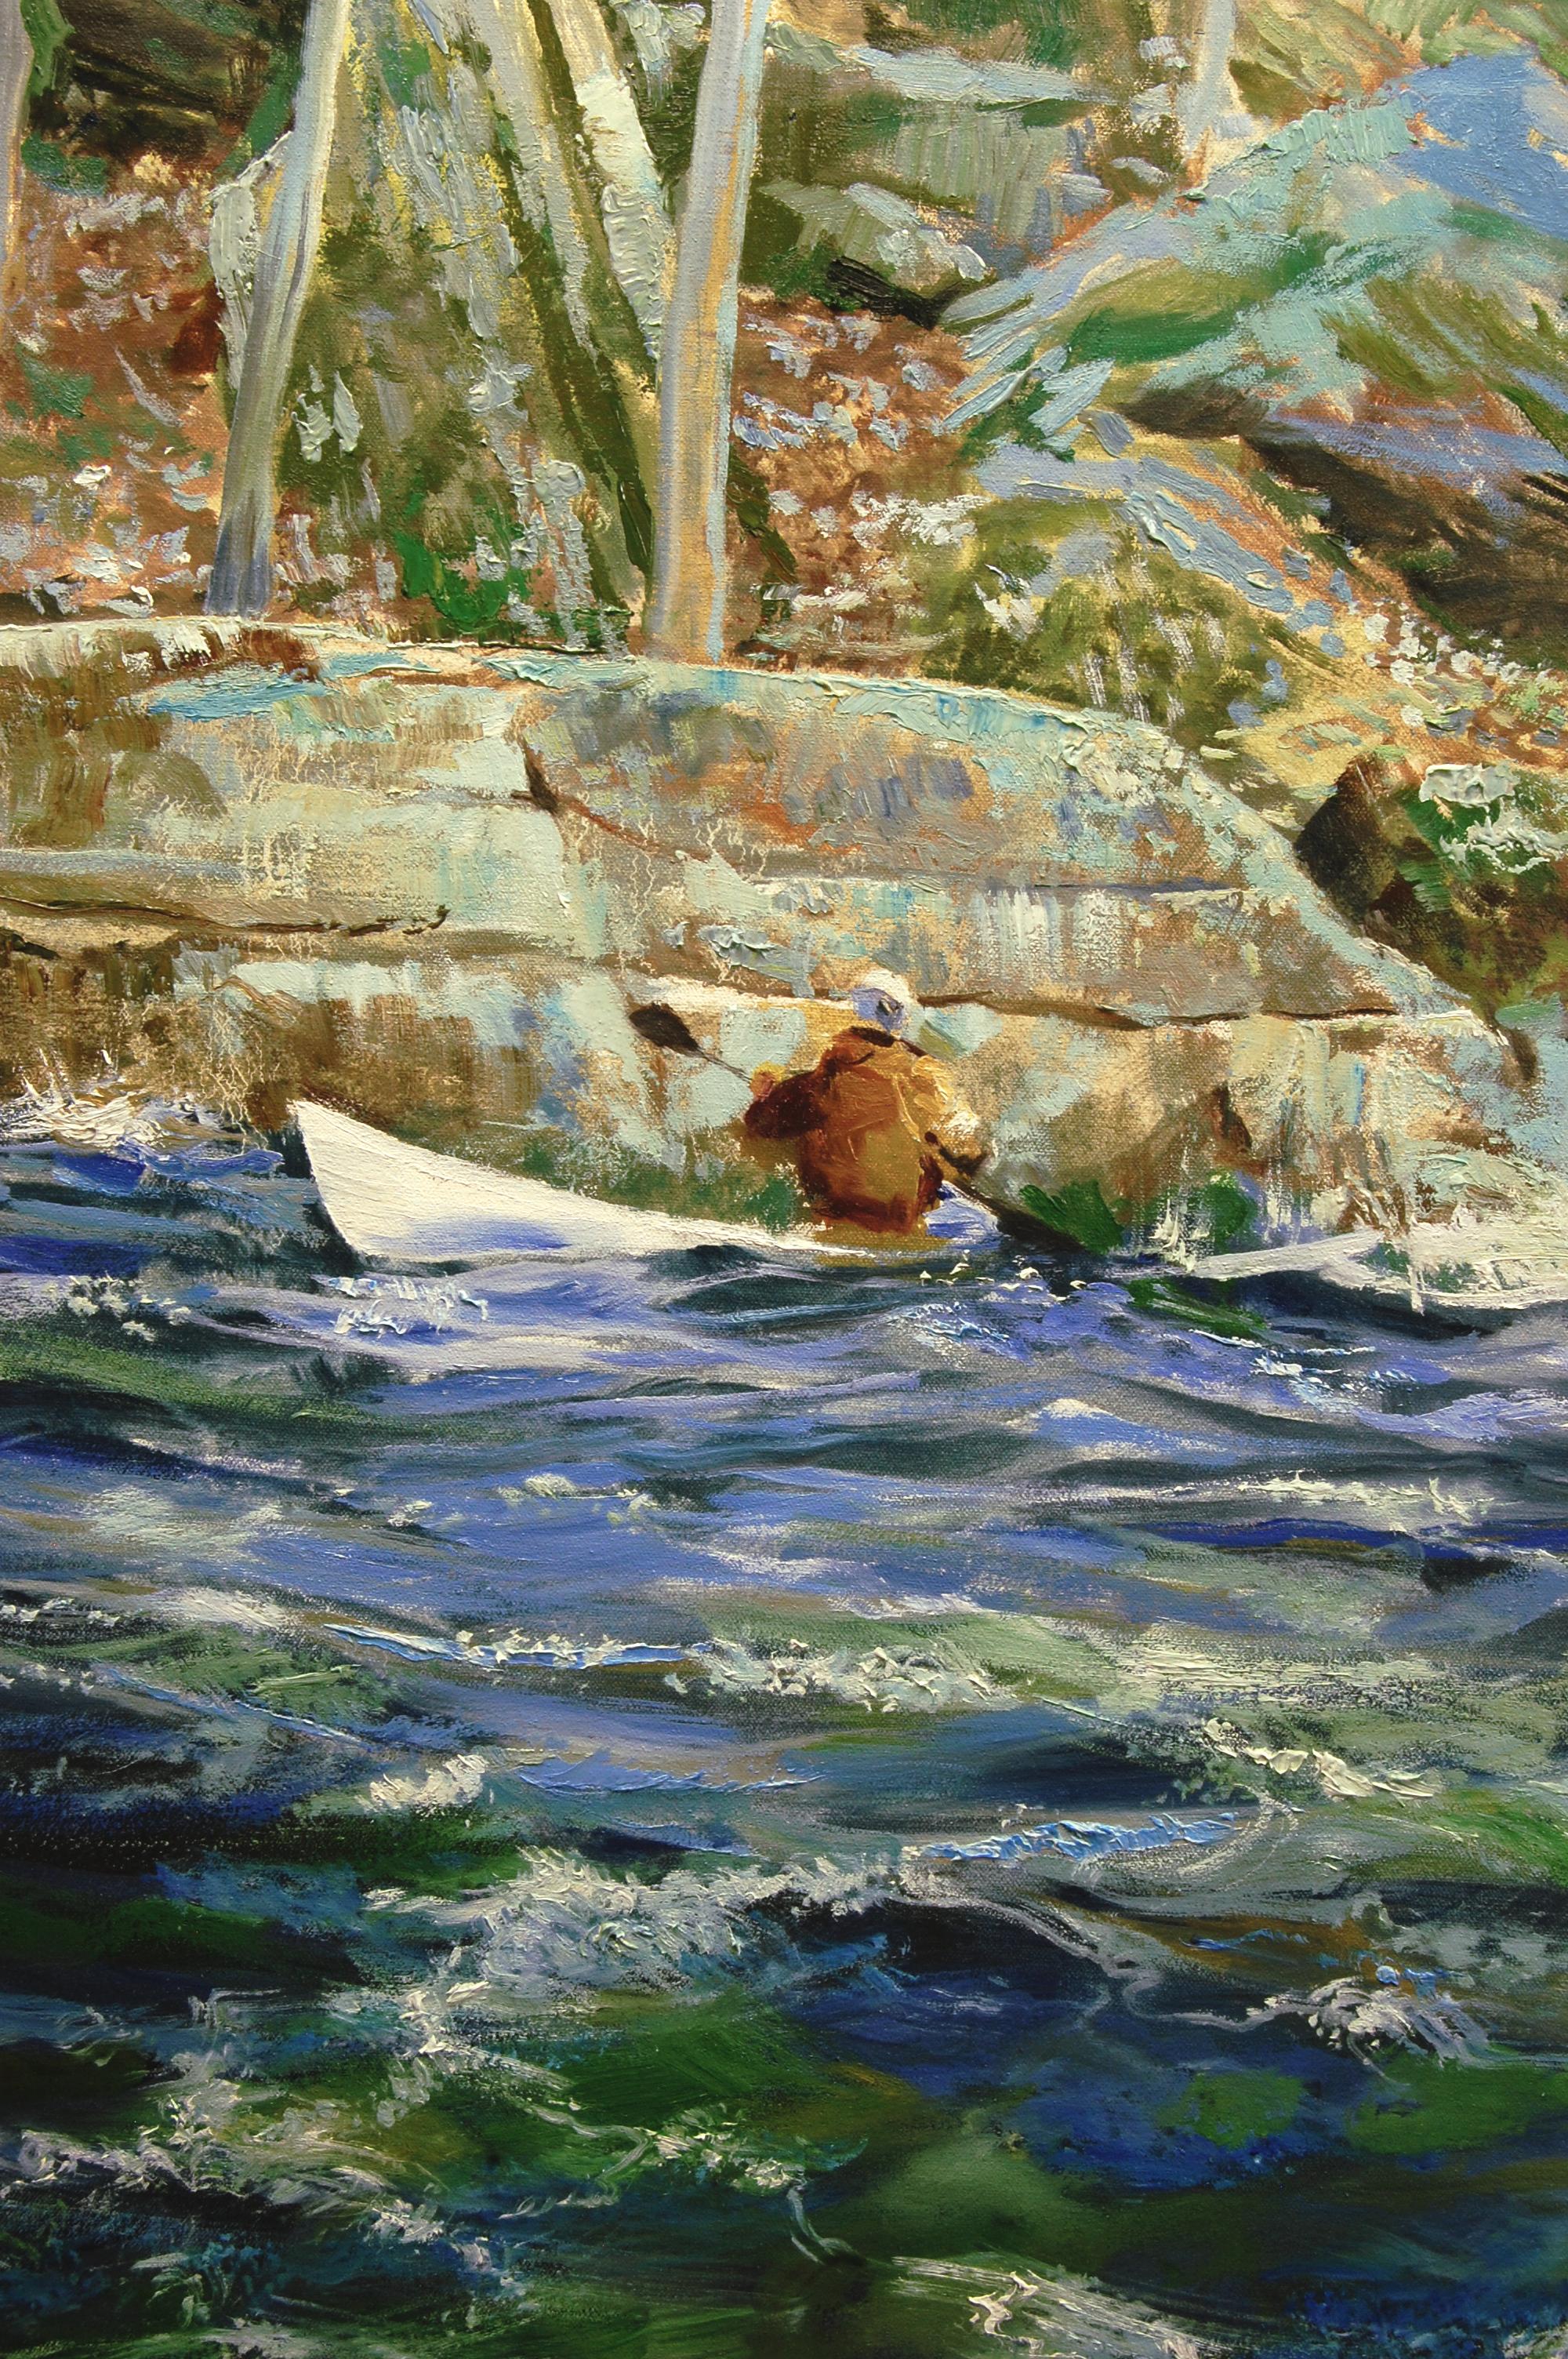 <p>Artist Comments<br>Artist Onelio Marrero presents an engrossing view of roaring rapids in the forest rendered in subtle colors with an impressionist approach. He portrays the critical moments when an expert kayaker heads into a narrow opening in